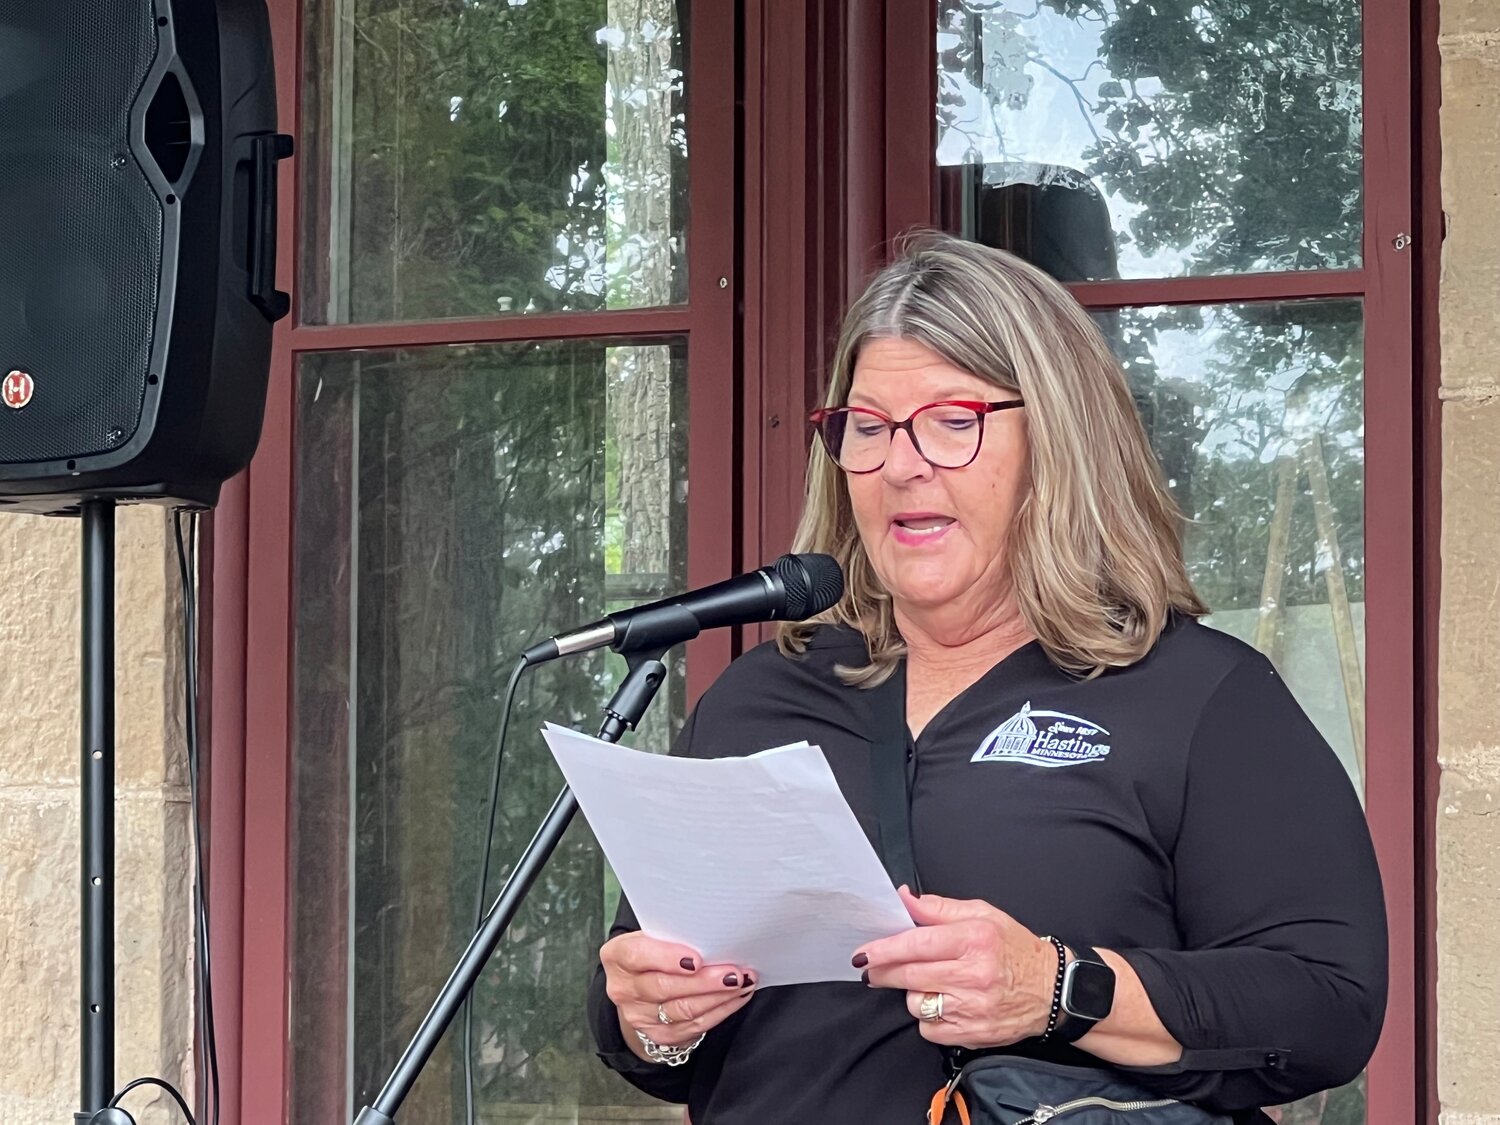 Hastings Mayor Mary Fasbender read the Gettysburg Address both Friday and Saturday afternoon on the front porch of the LeDuc Historic Estate at the Dakota County Historical Society Civil War Weekend.